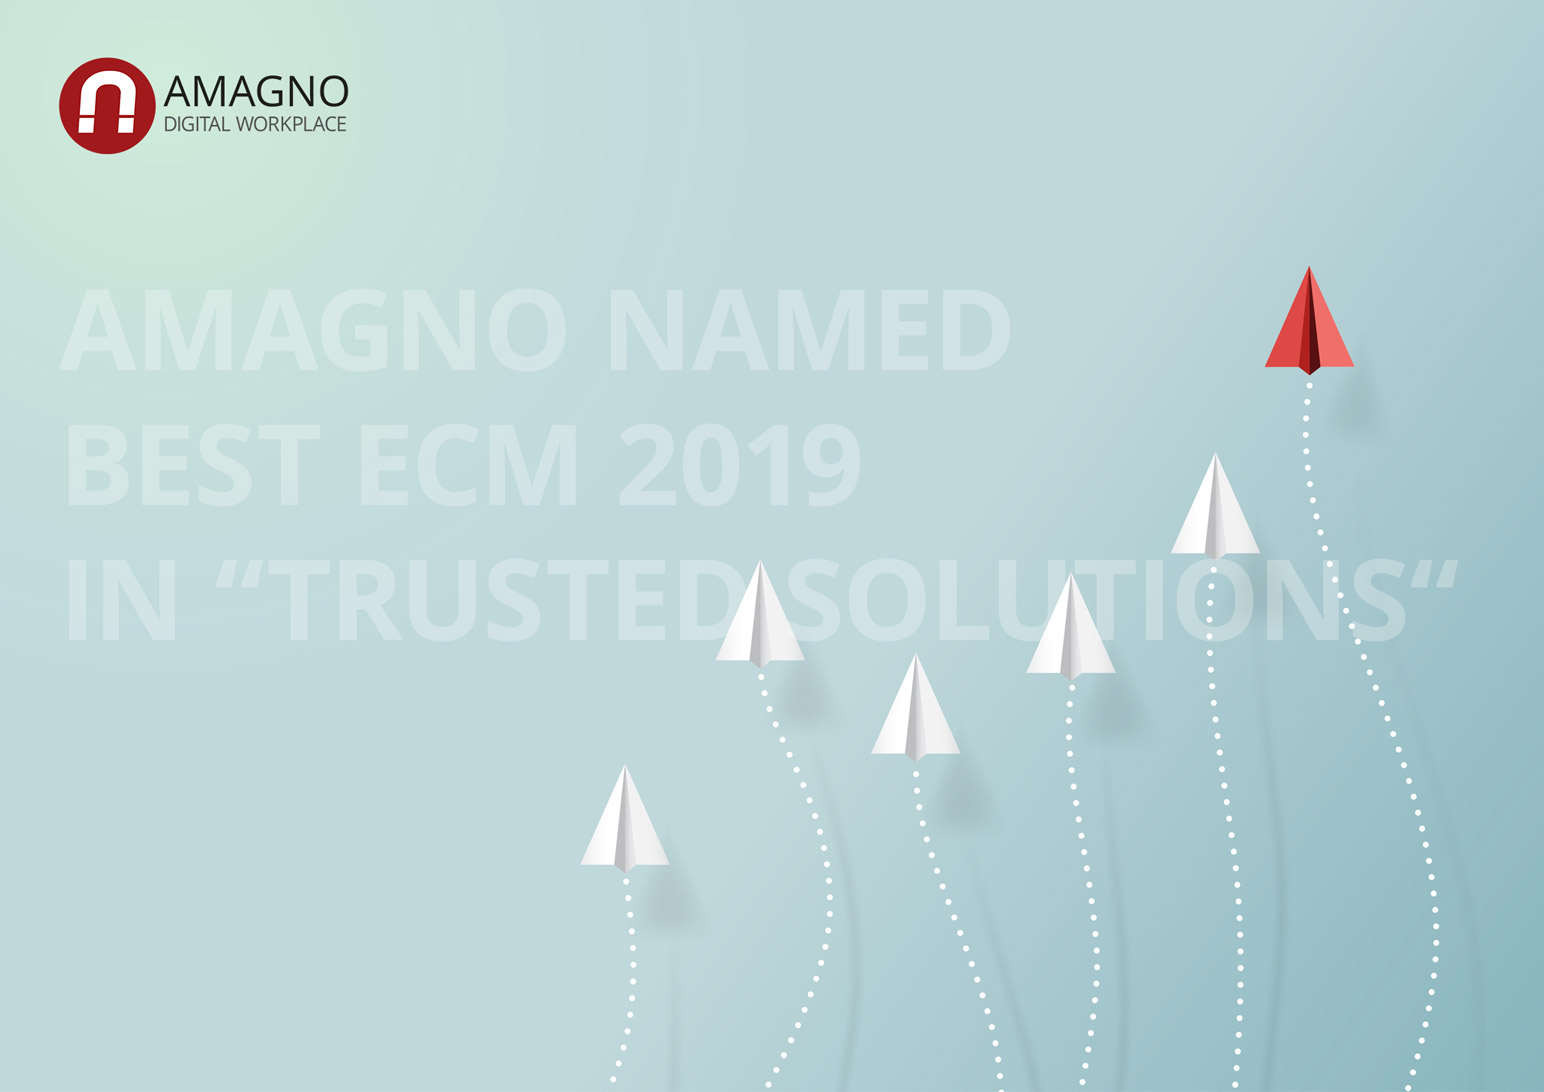 AMAGNO NAMED BEST ECM 2019 IN “TRUSTED SOLUTIONS” COMPUTERBILD INDUSTRY AWARDS